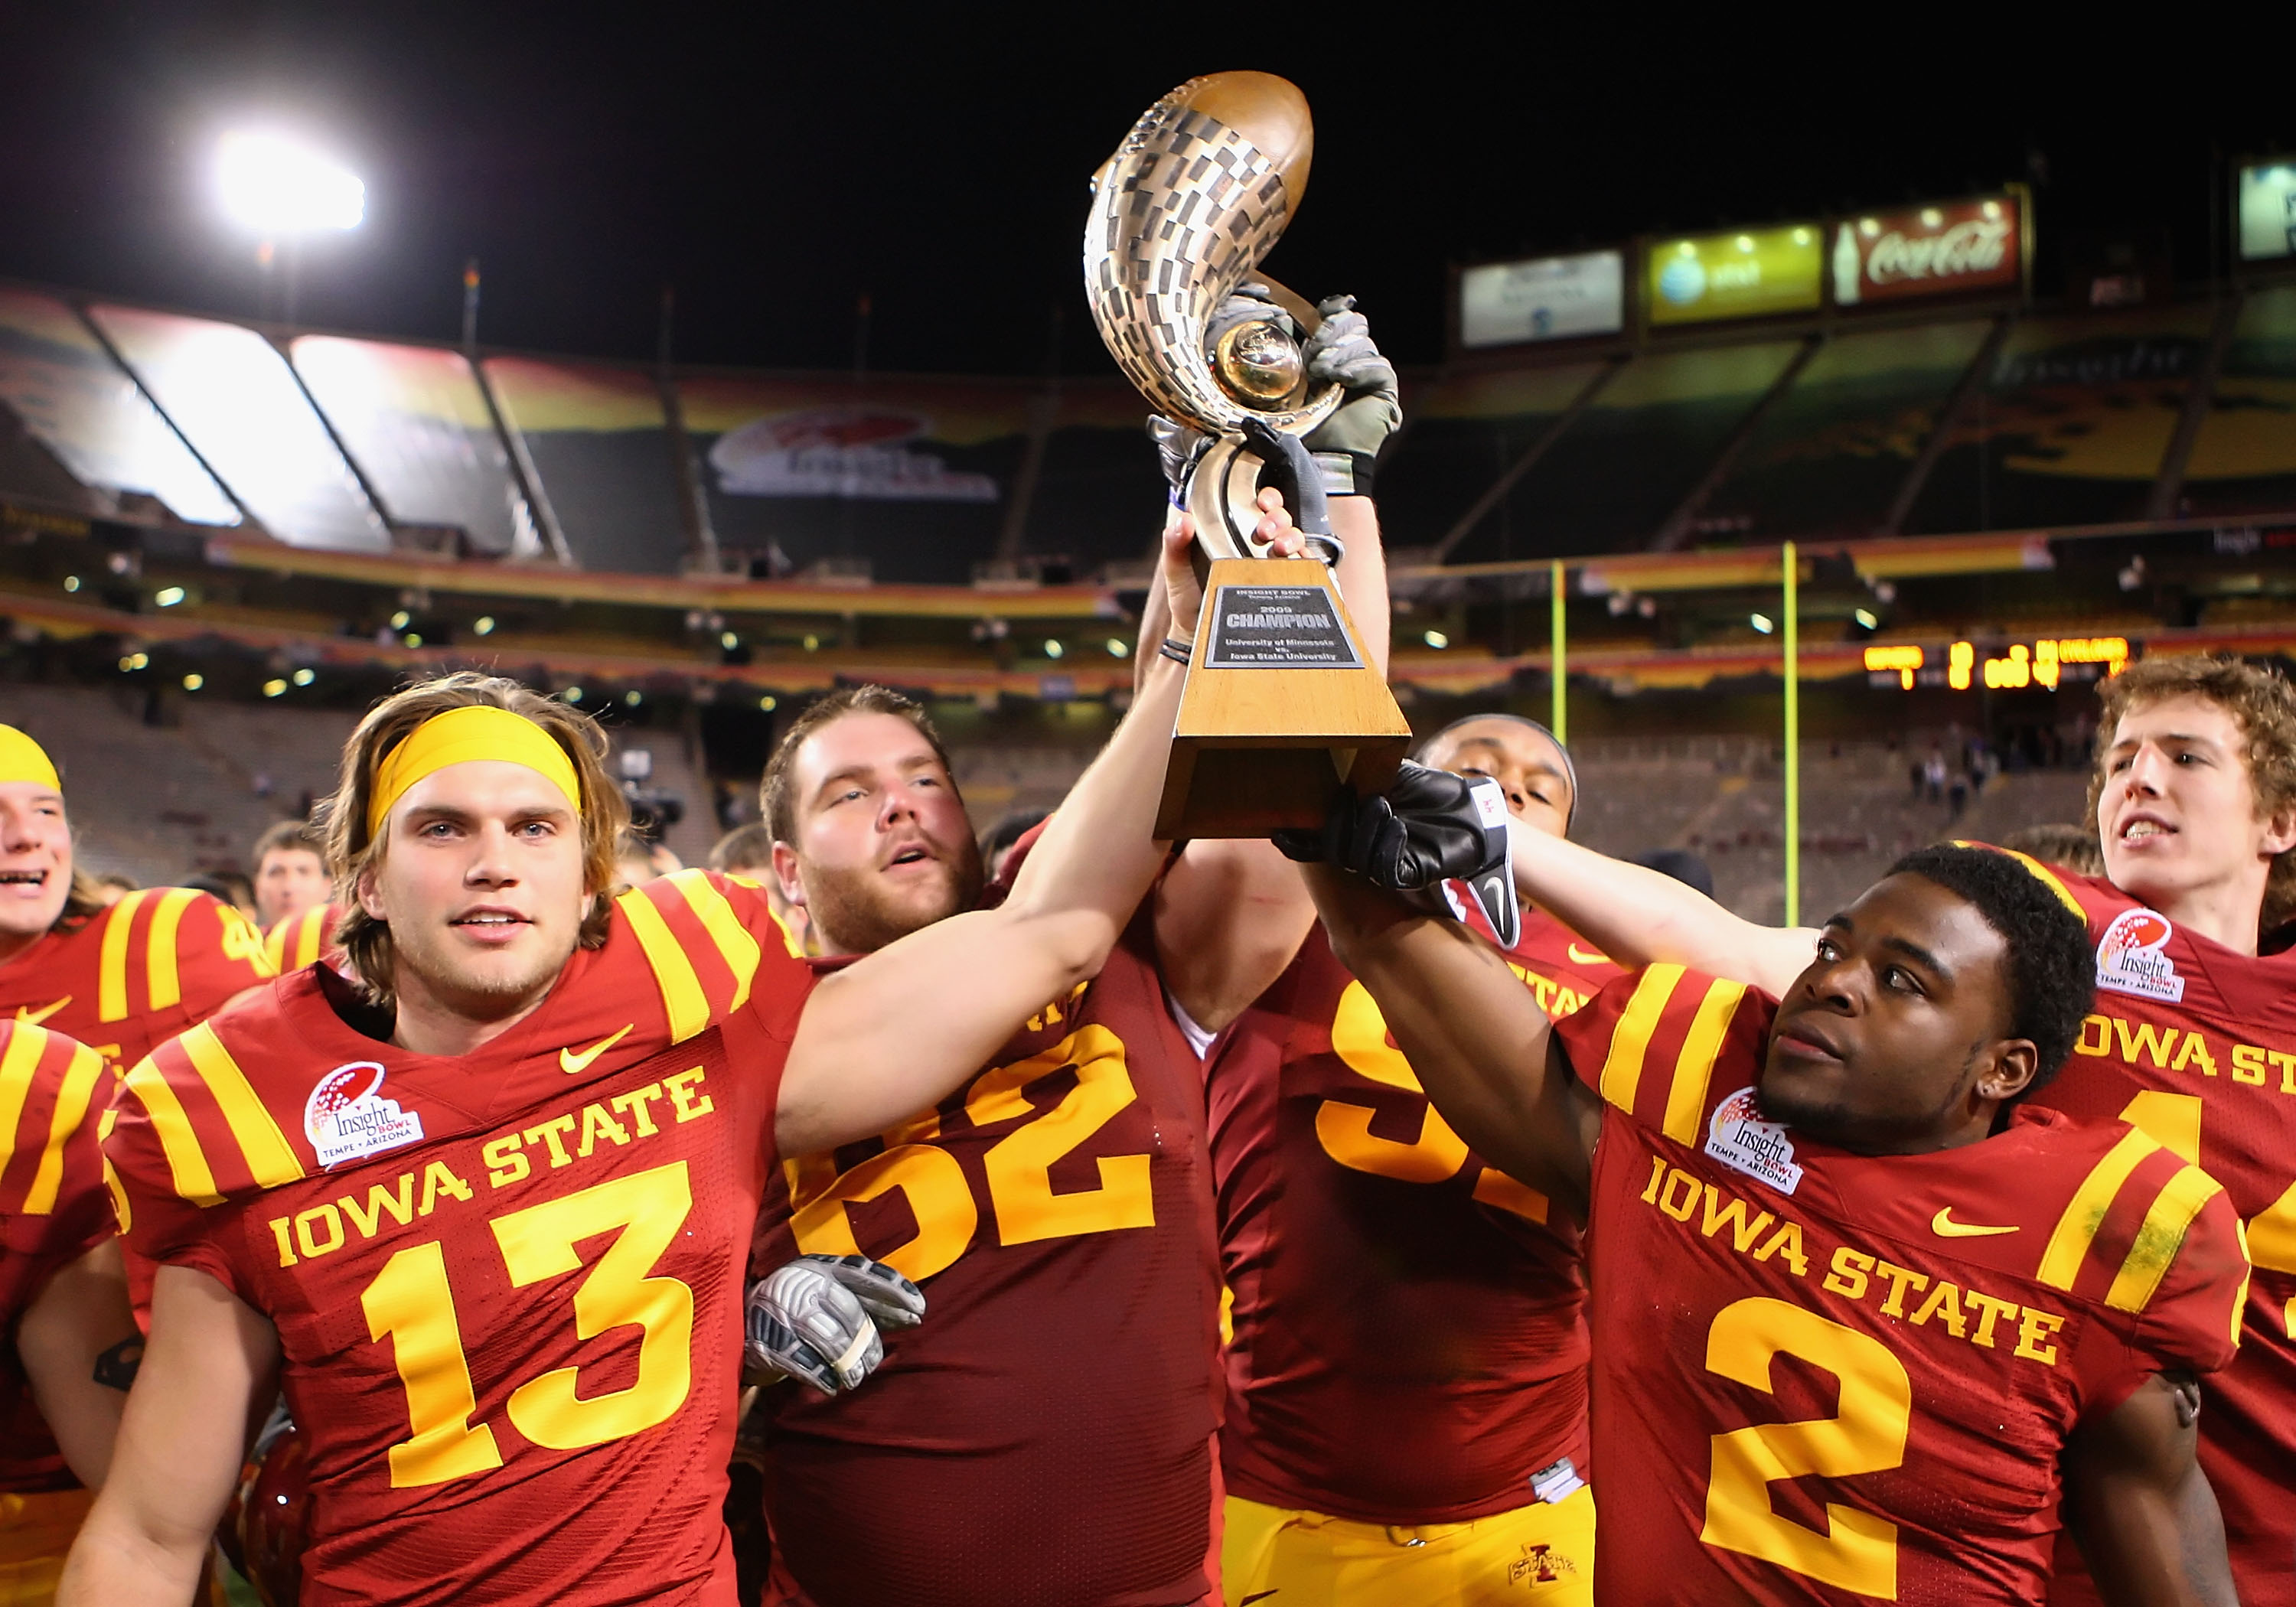 TEMPE, AZ - DECEMBER 31:  (L-R)  Mike Brandtner #13, Nate Frere #62 and James Smith #2 of the Iowa State Cyclones celebrate with the Insight Bowl trophy after defeating the Minnesota Golden Gophers at Arizona Stadium on December 31, 2009 in Tempe, Arizona